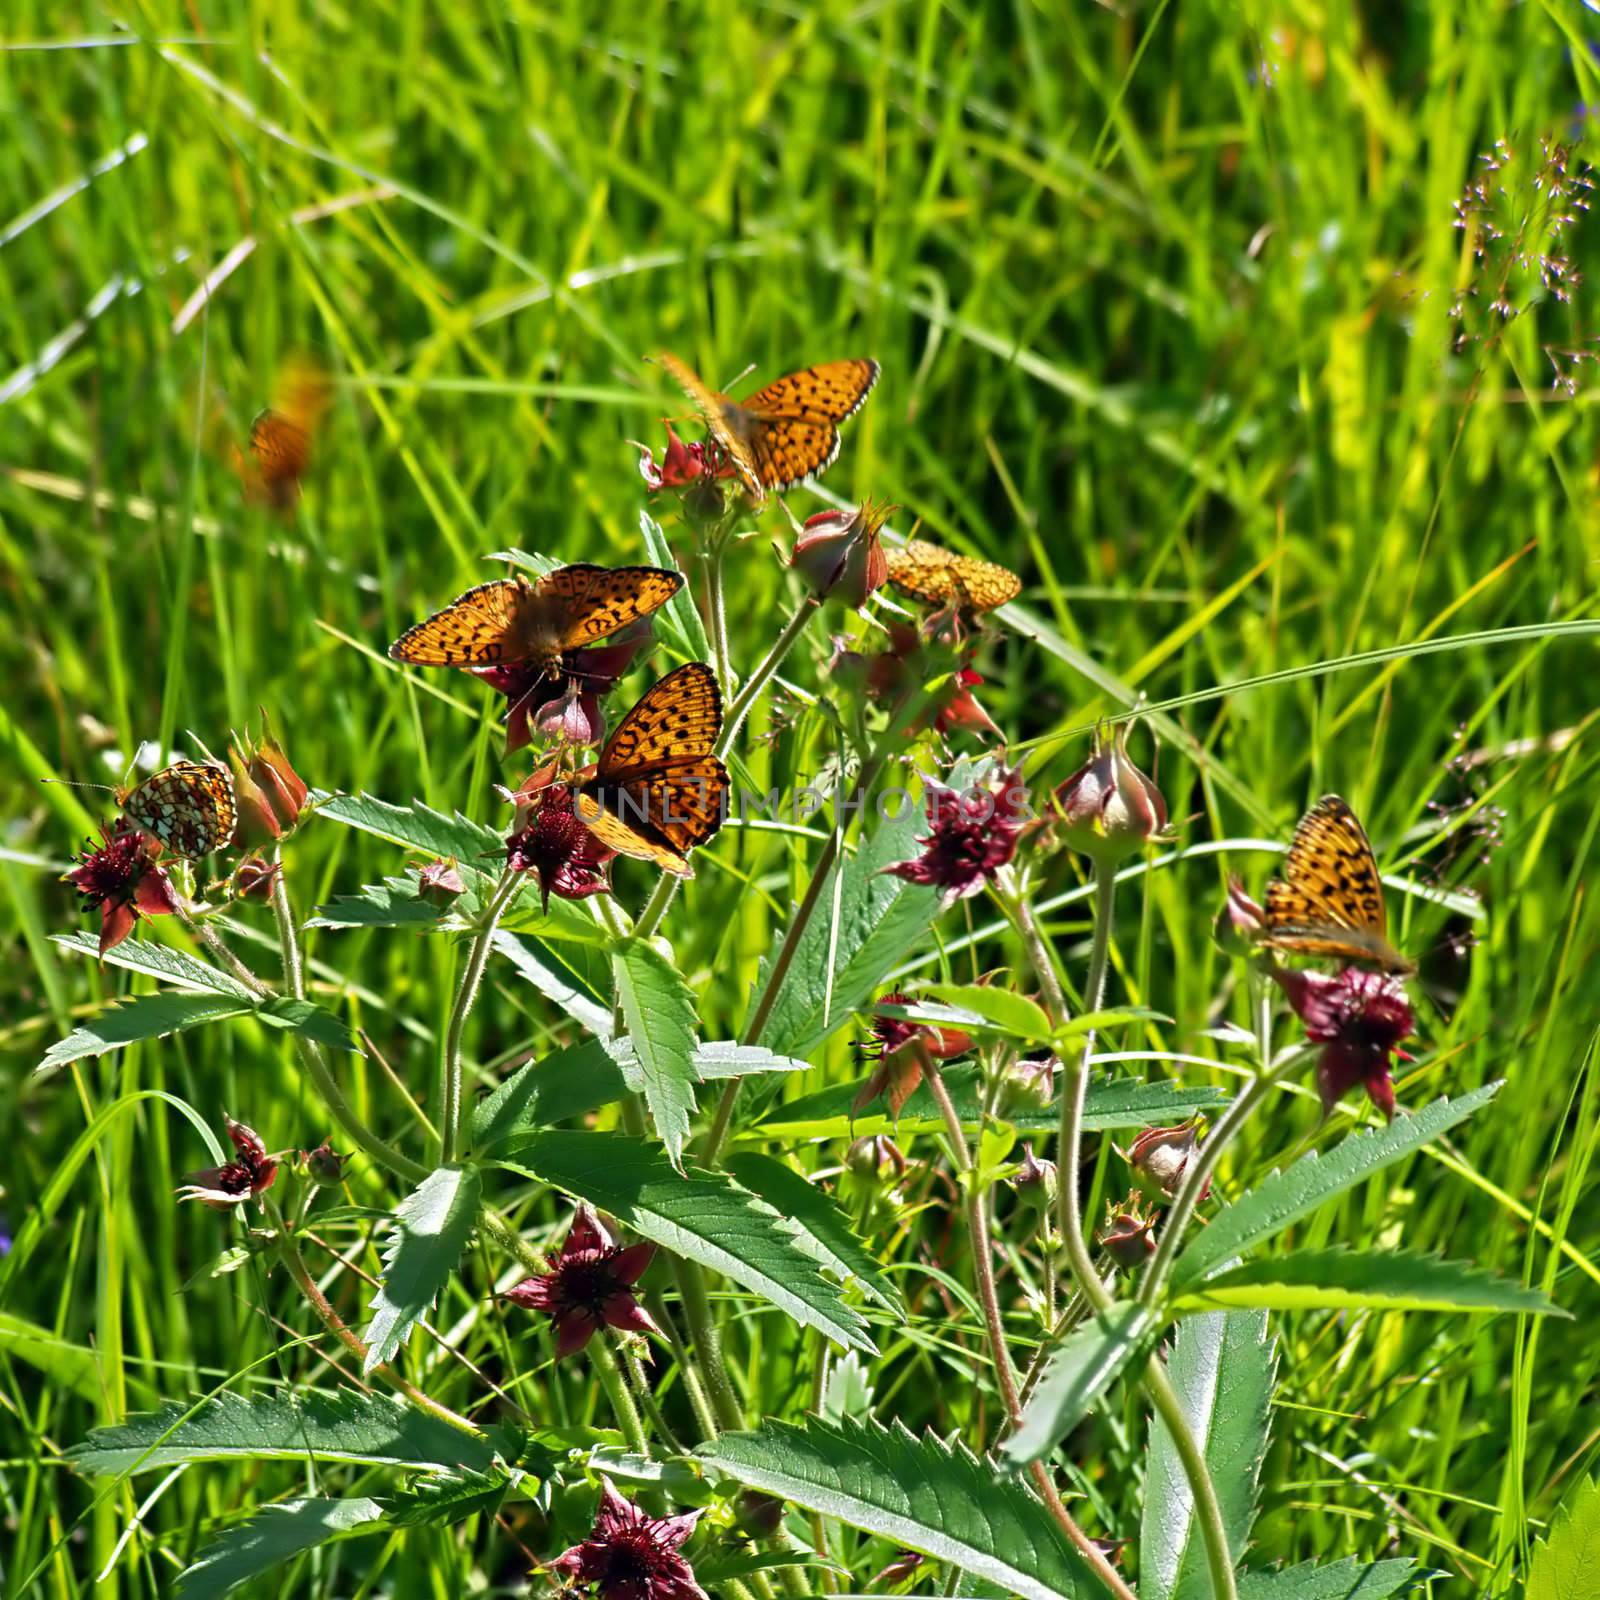 butterflies on herb by basel101658